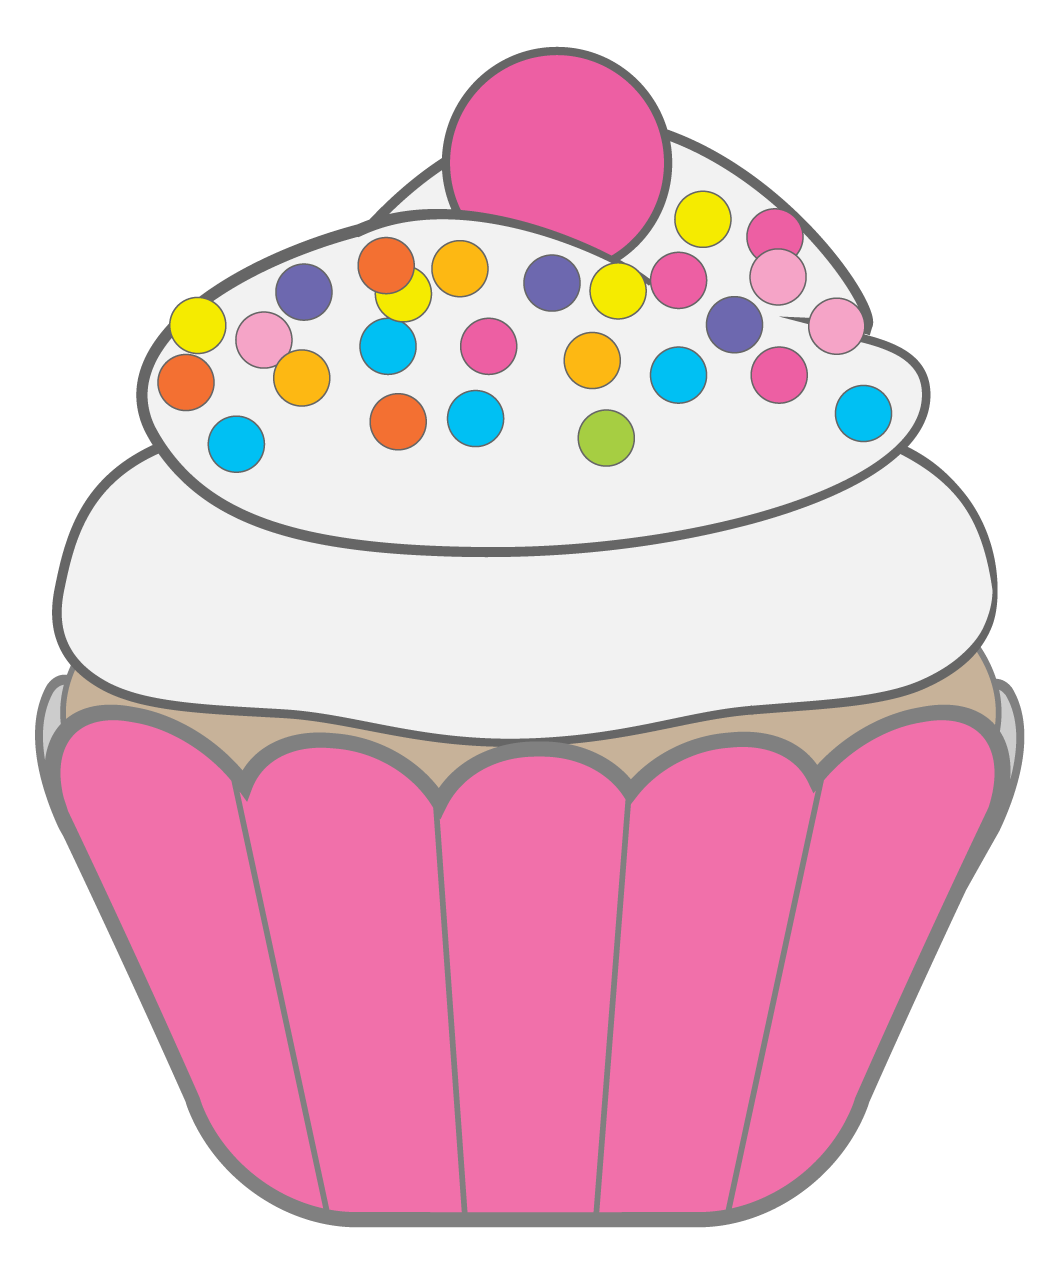 Cupcakes muffins by carol. Clipart snowflake cake